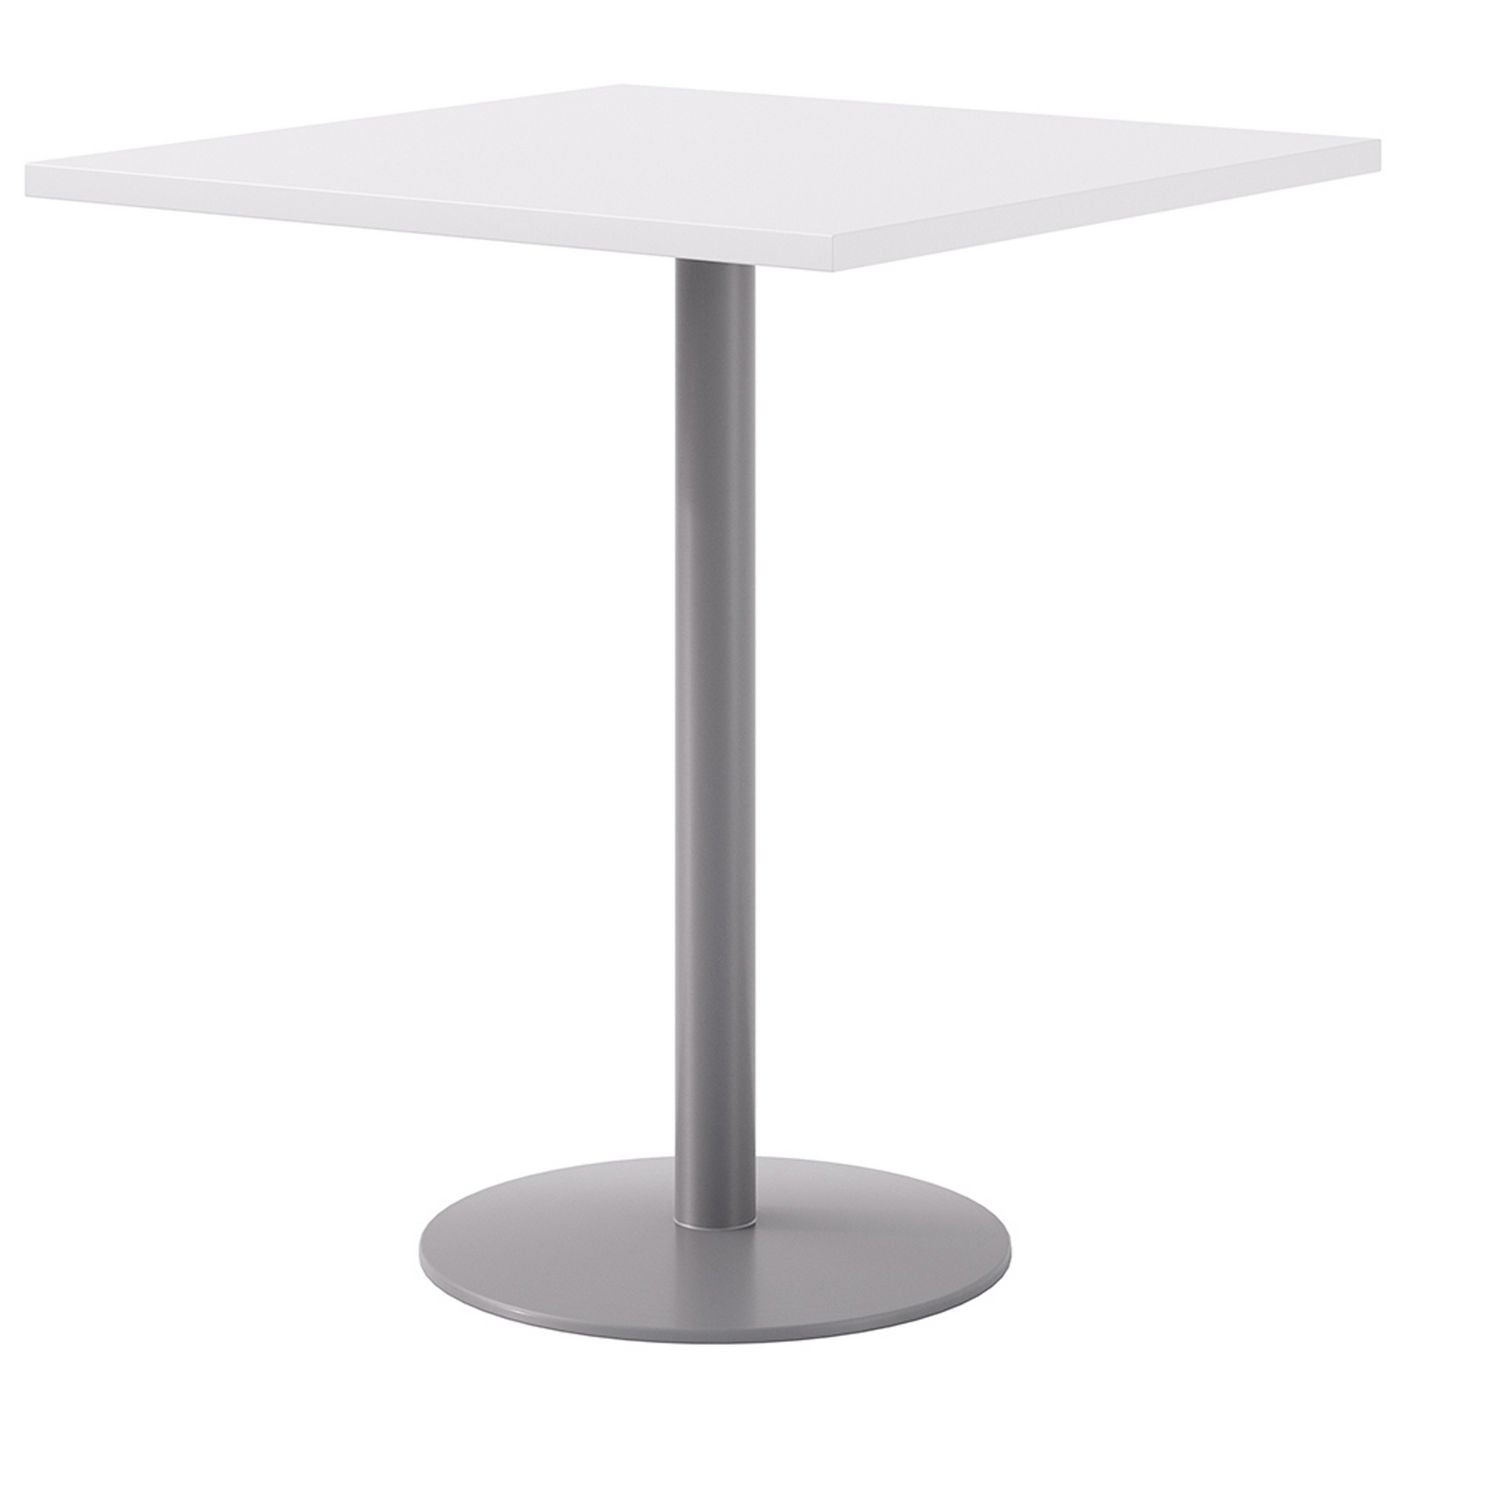 pedestal-bistro-table-with-4-natural-jive-series-barstools-square-36-x-36-x-41-designer-white-ships-in-4-6-business-days_kfi811774039895 - 2